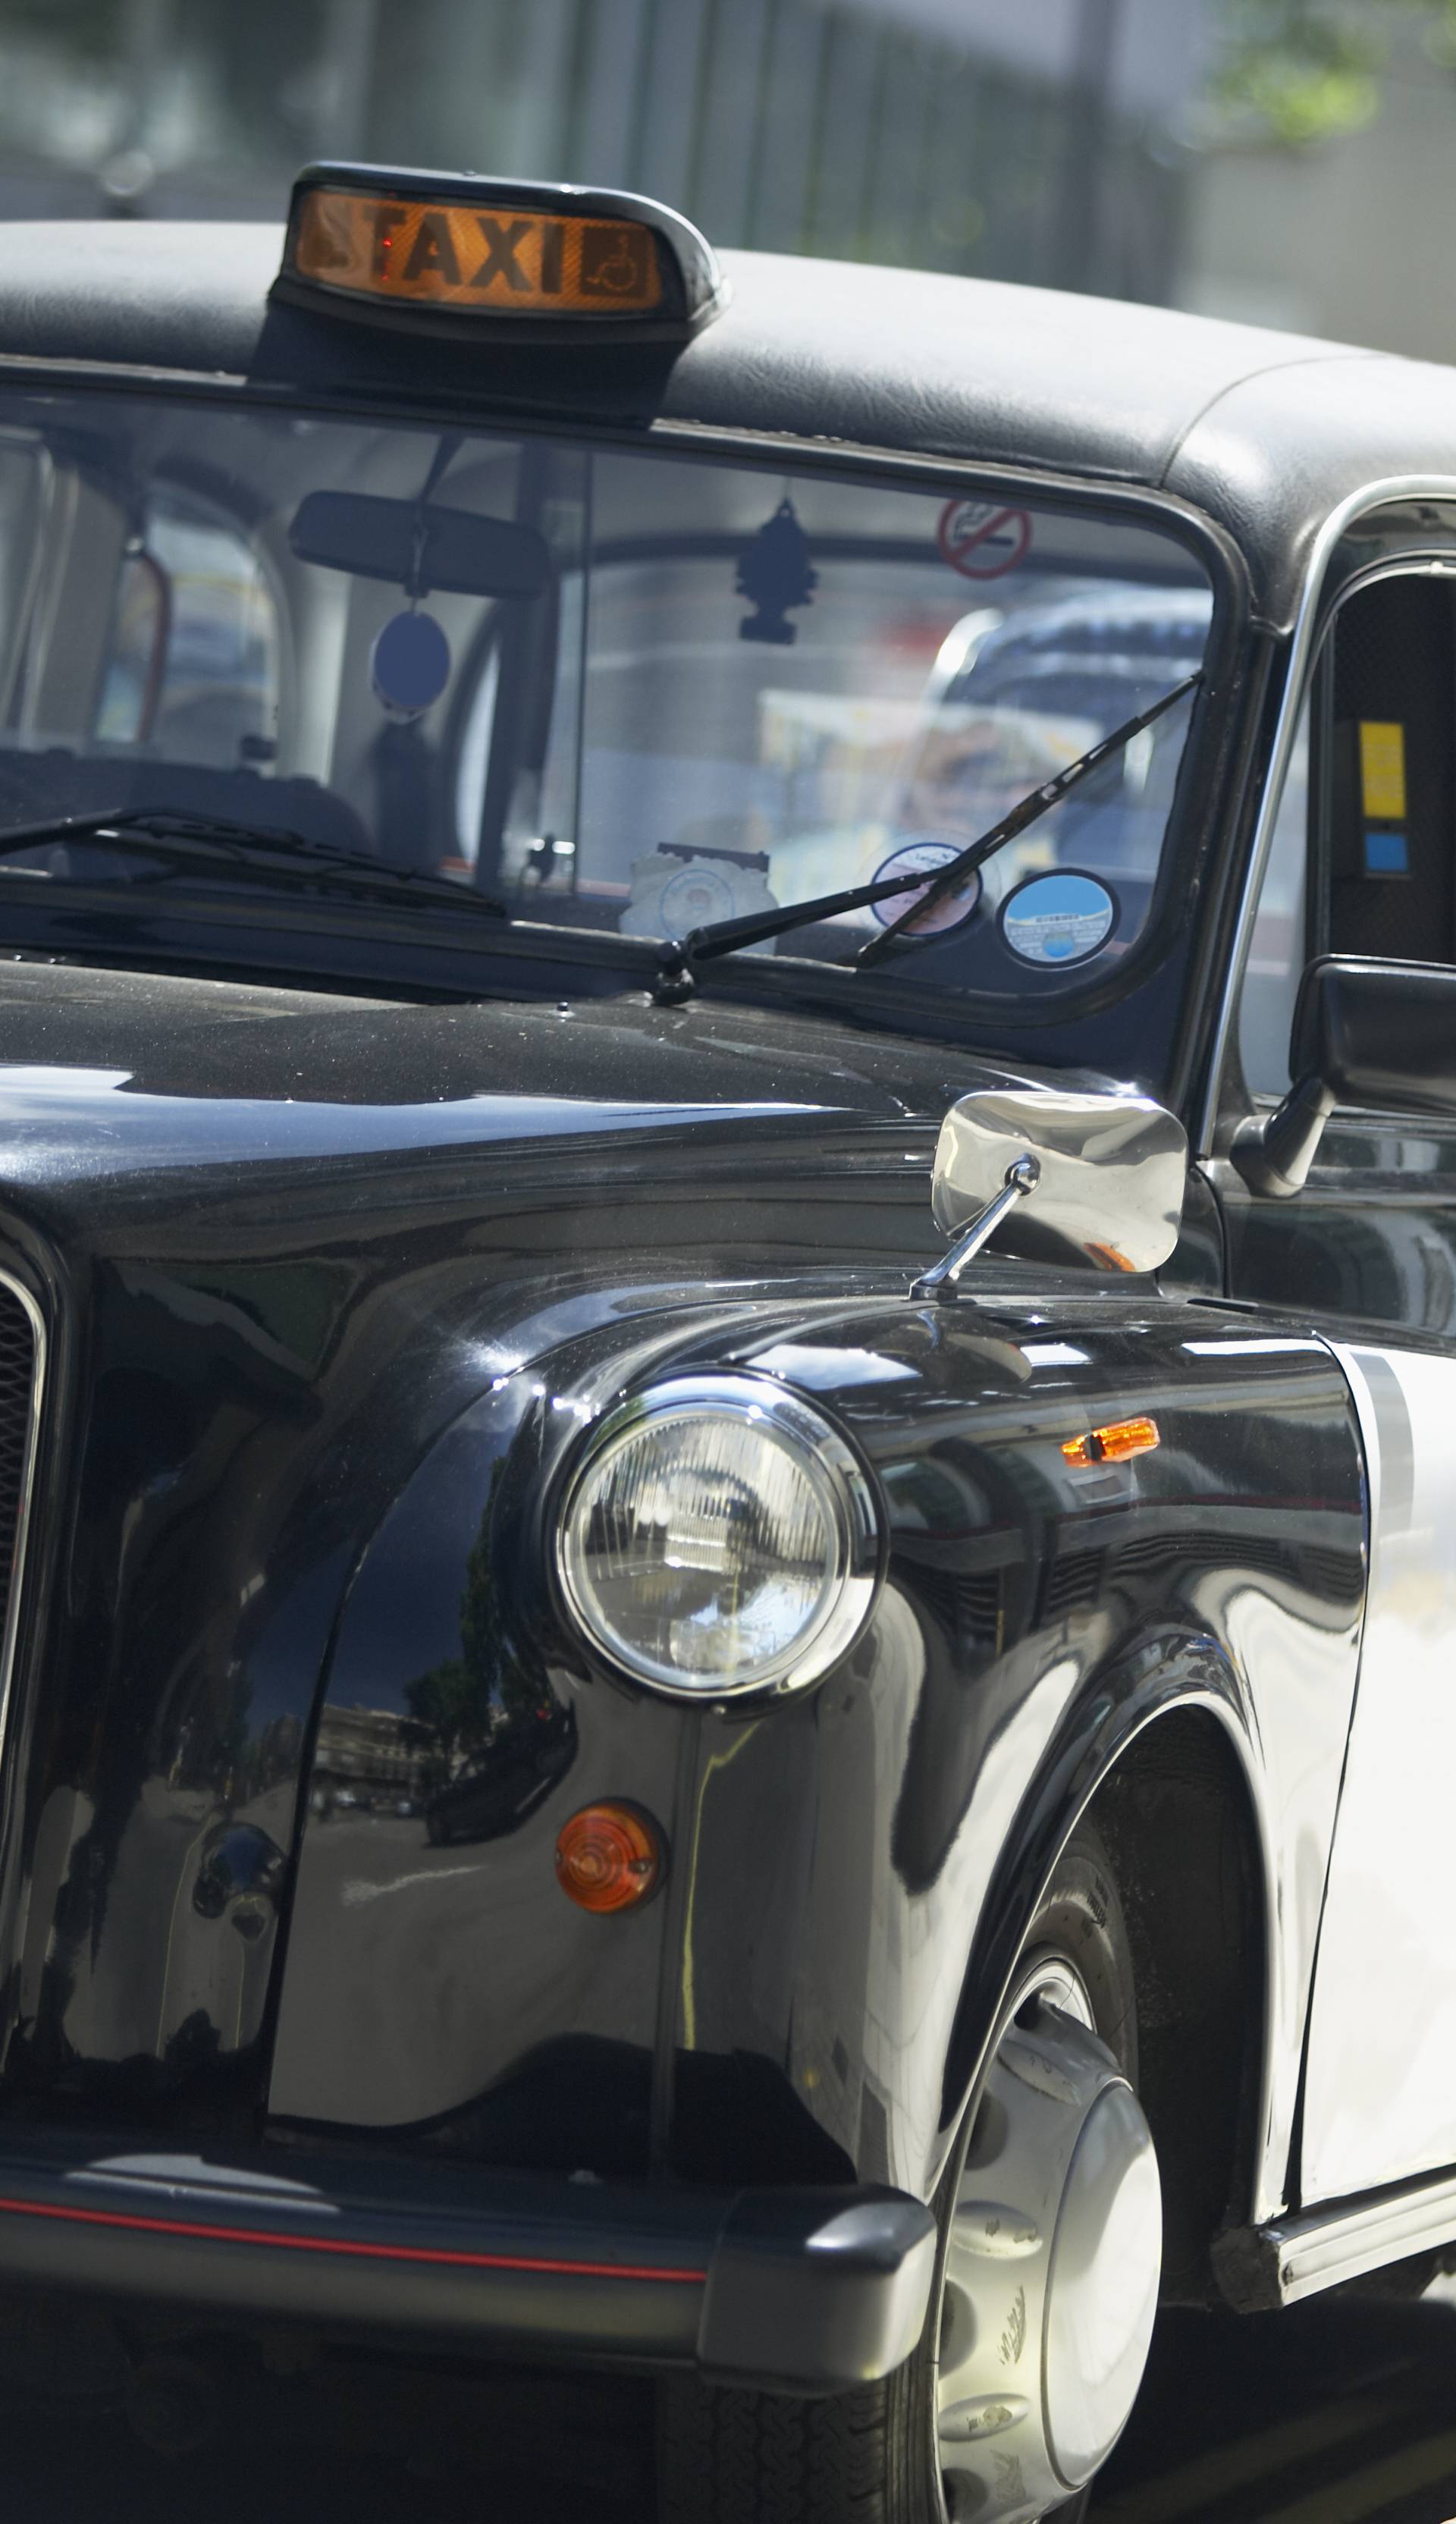 London Taxis Lined Up On Sidewalk